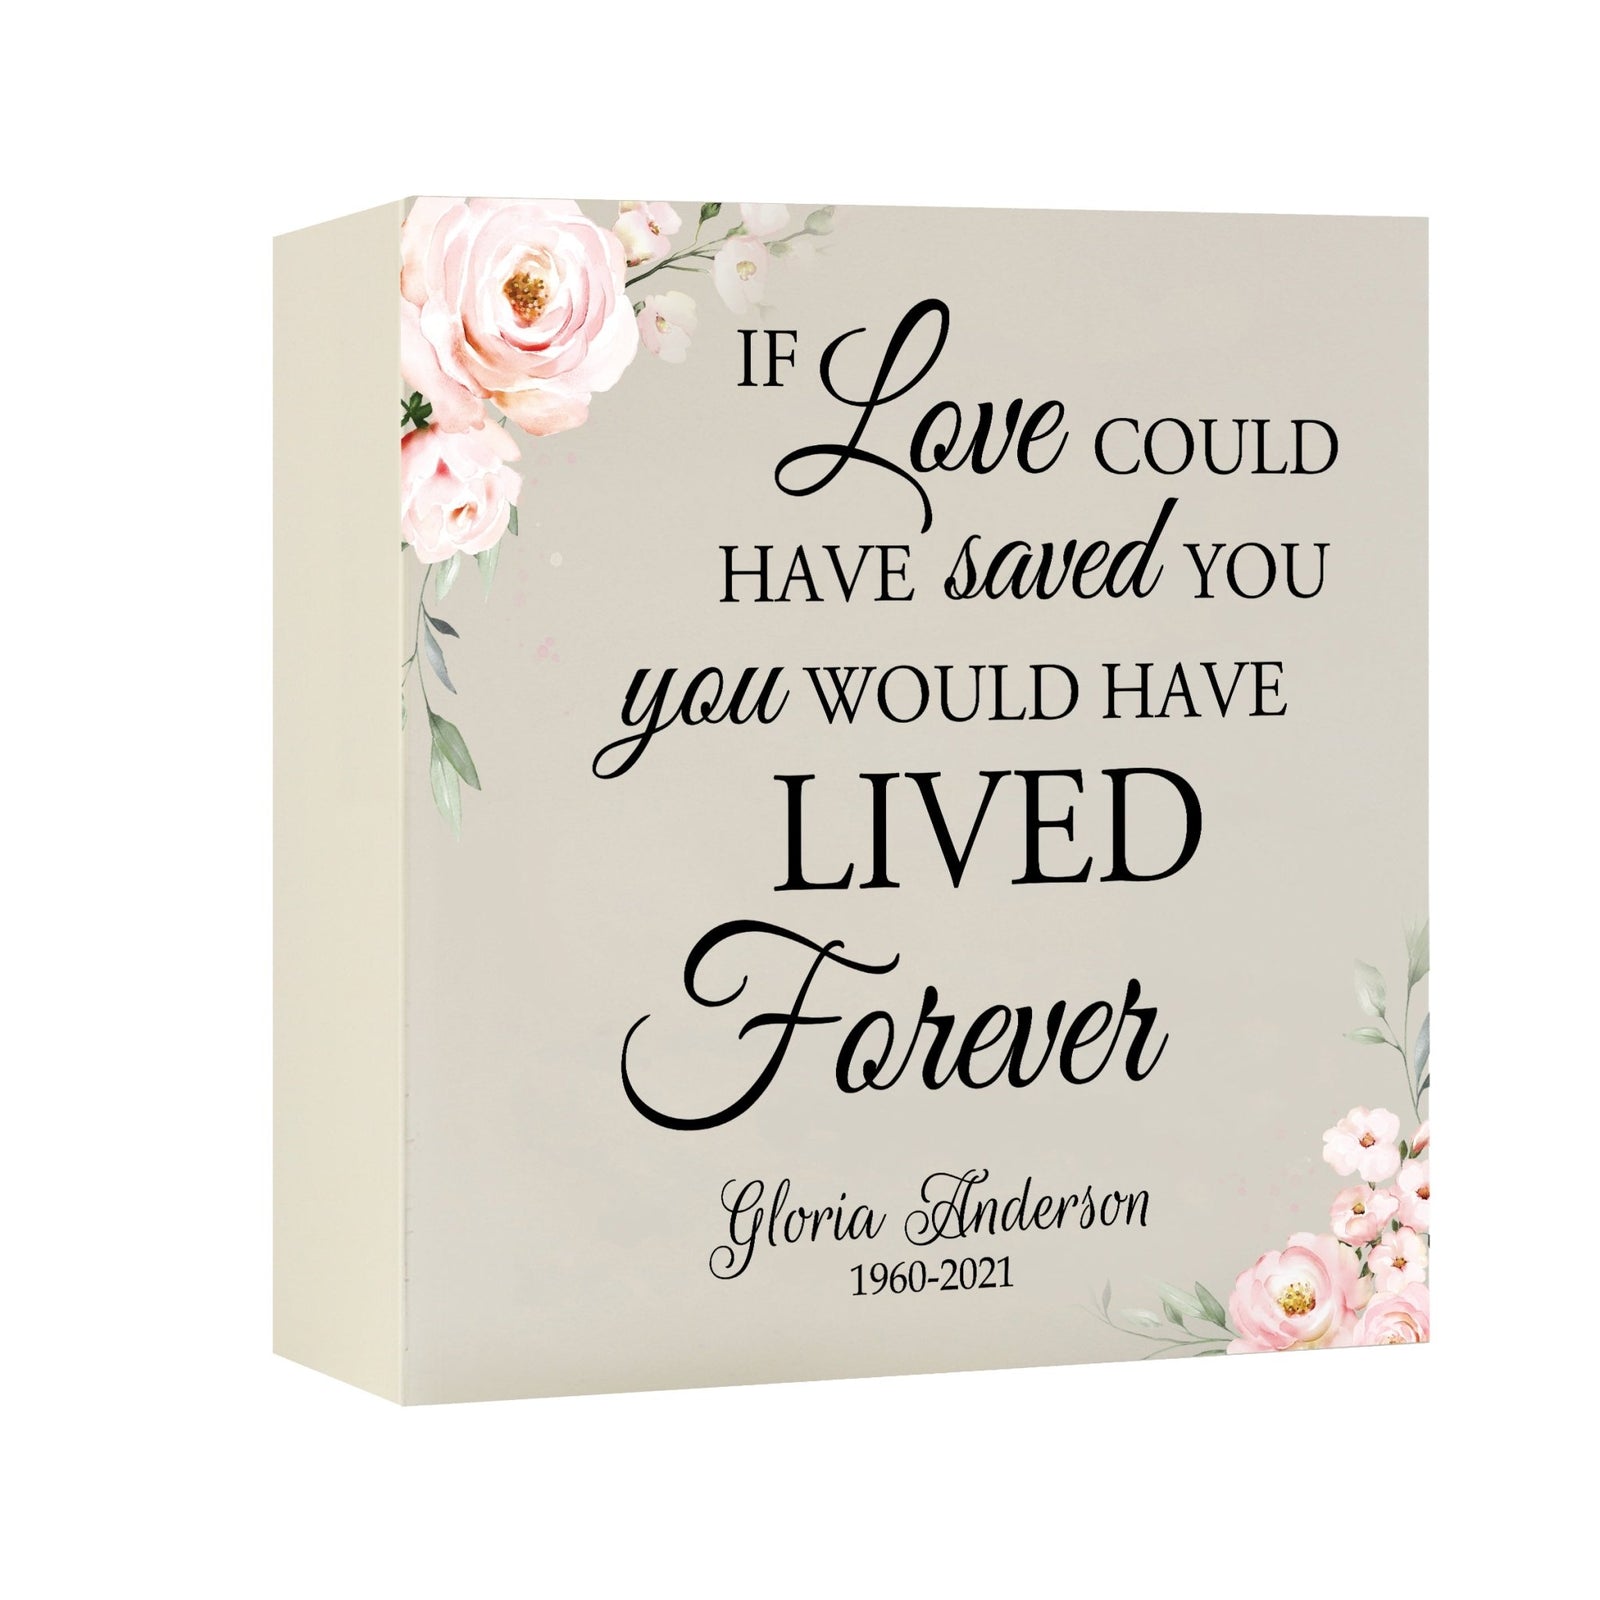 Timeless Human Memorial Shadow Box Urn With Inspirational Verse in Ivory - If Love Could Have Saved You - LifeSong Milestones